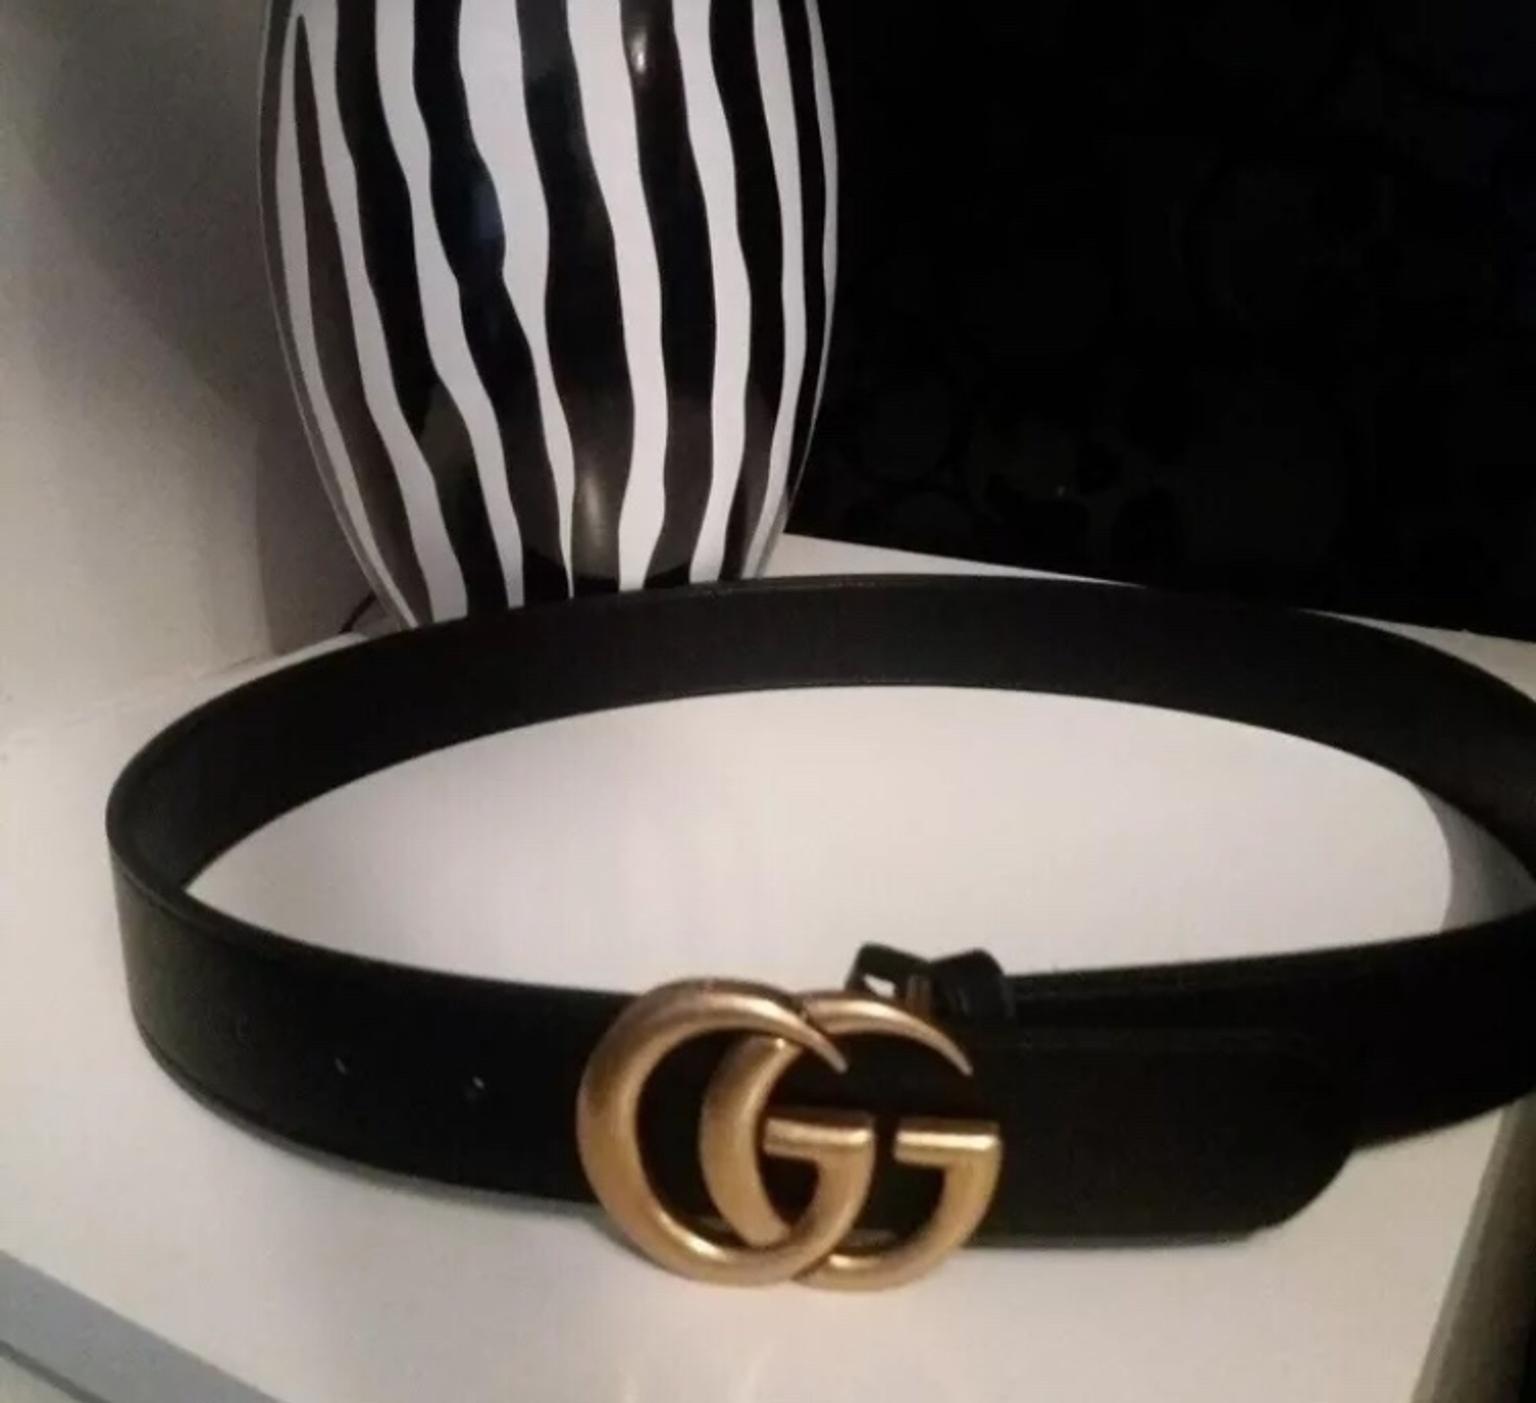 where can i sell a gucci belt